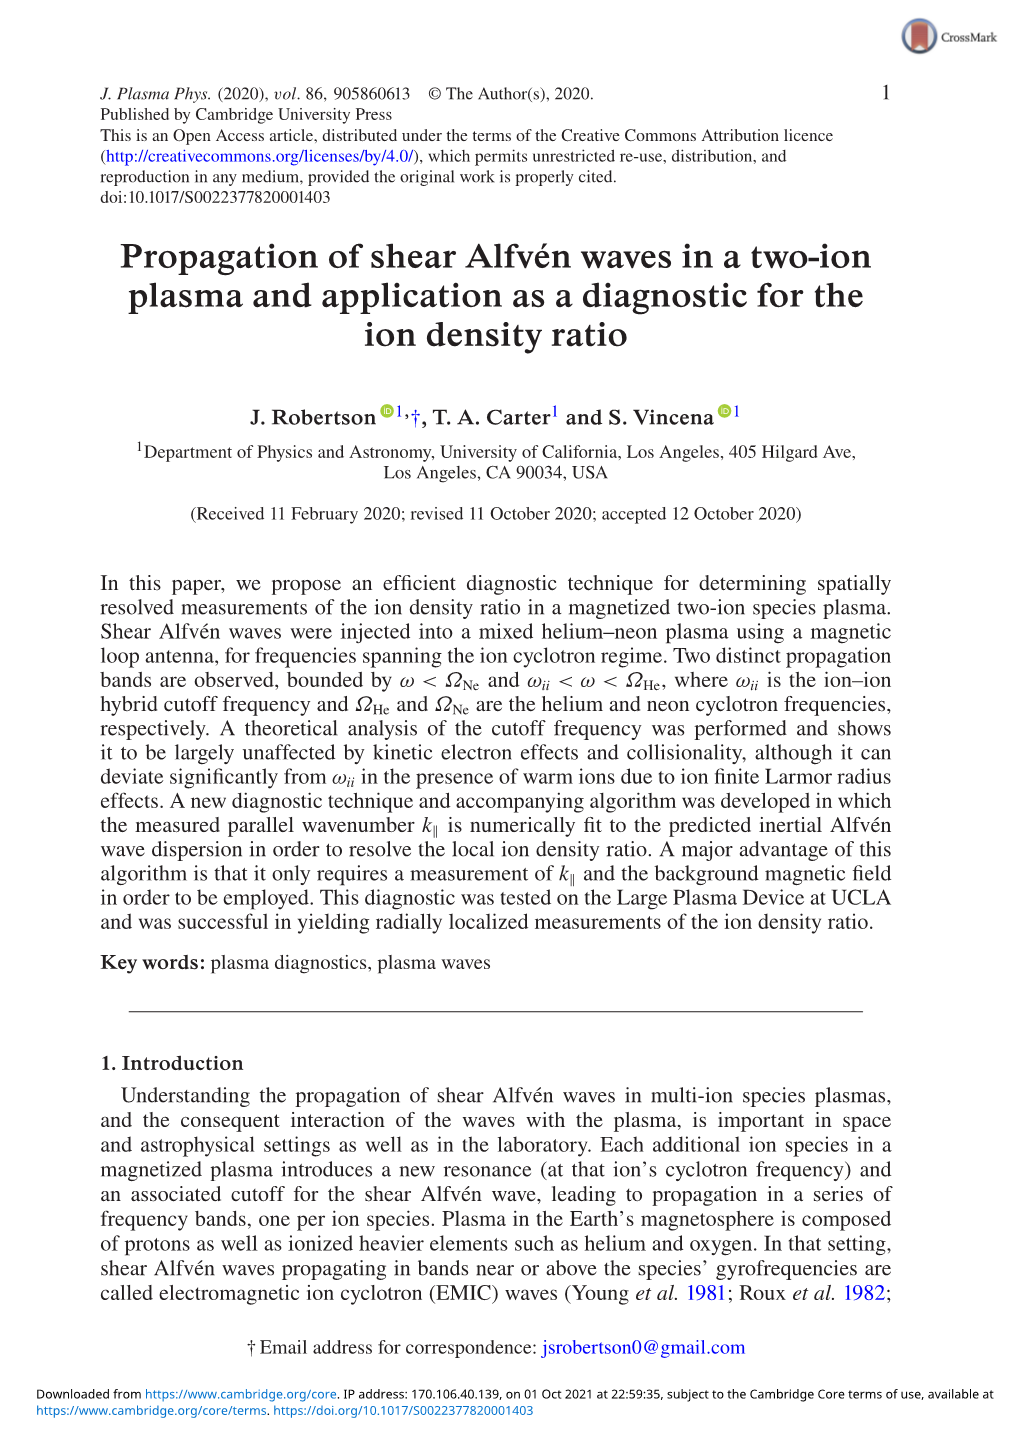 Propagation of Shear Alfvén Waves in a Two-Ion Plasma and Application As a Diagnostic for the Ion Density Ratio